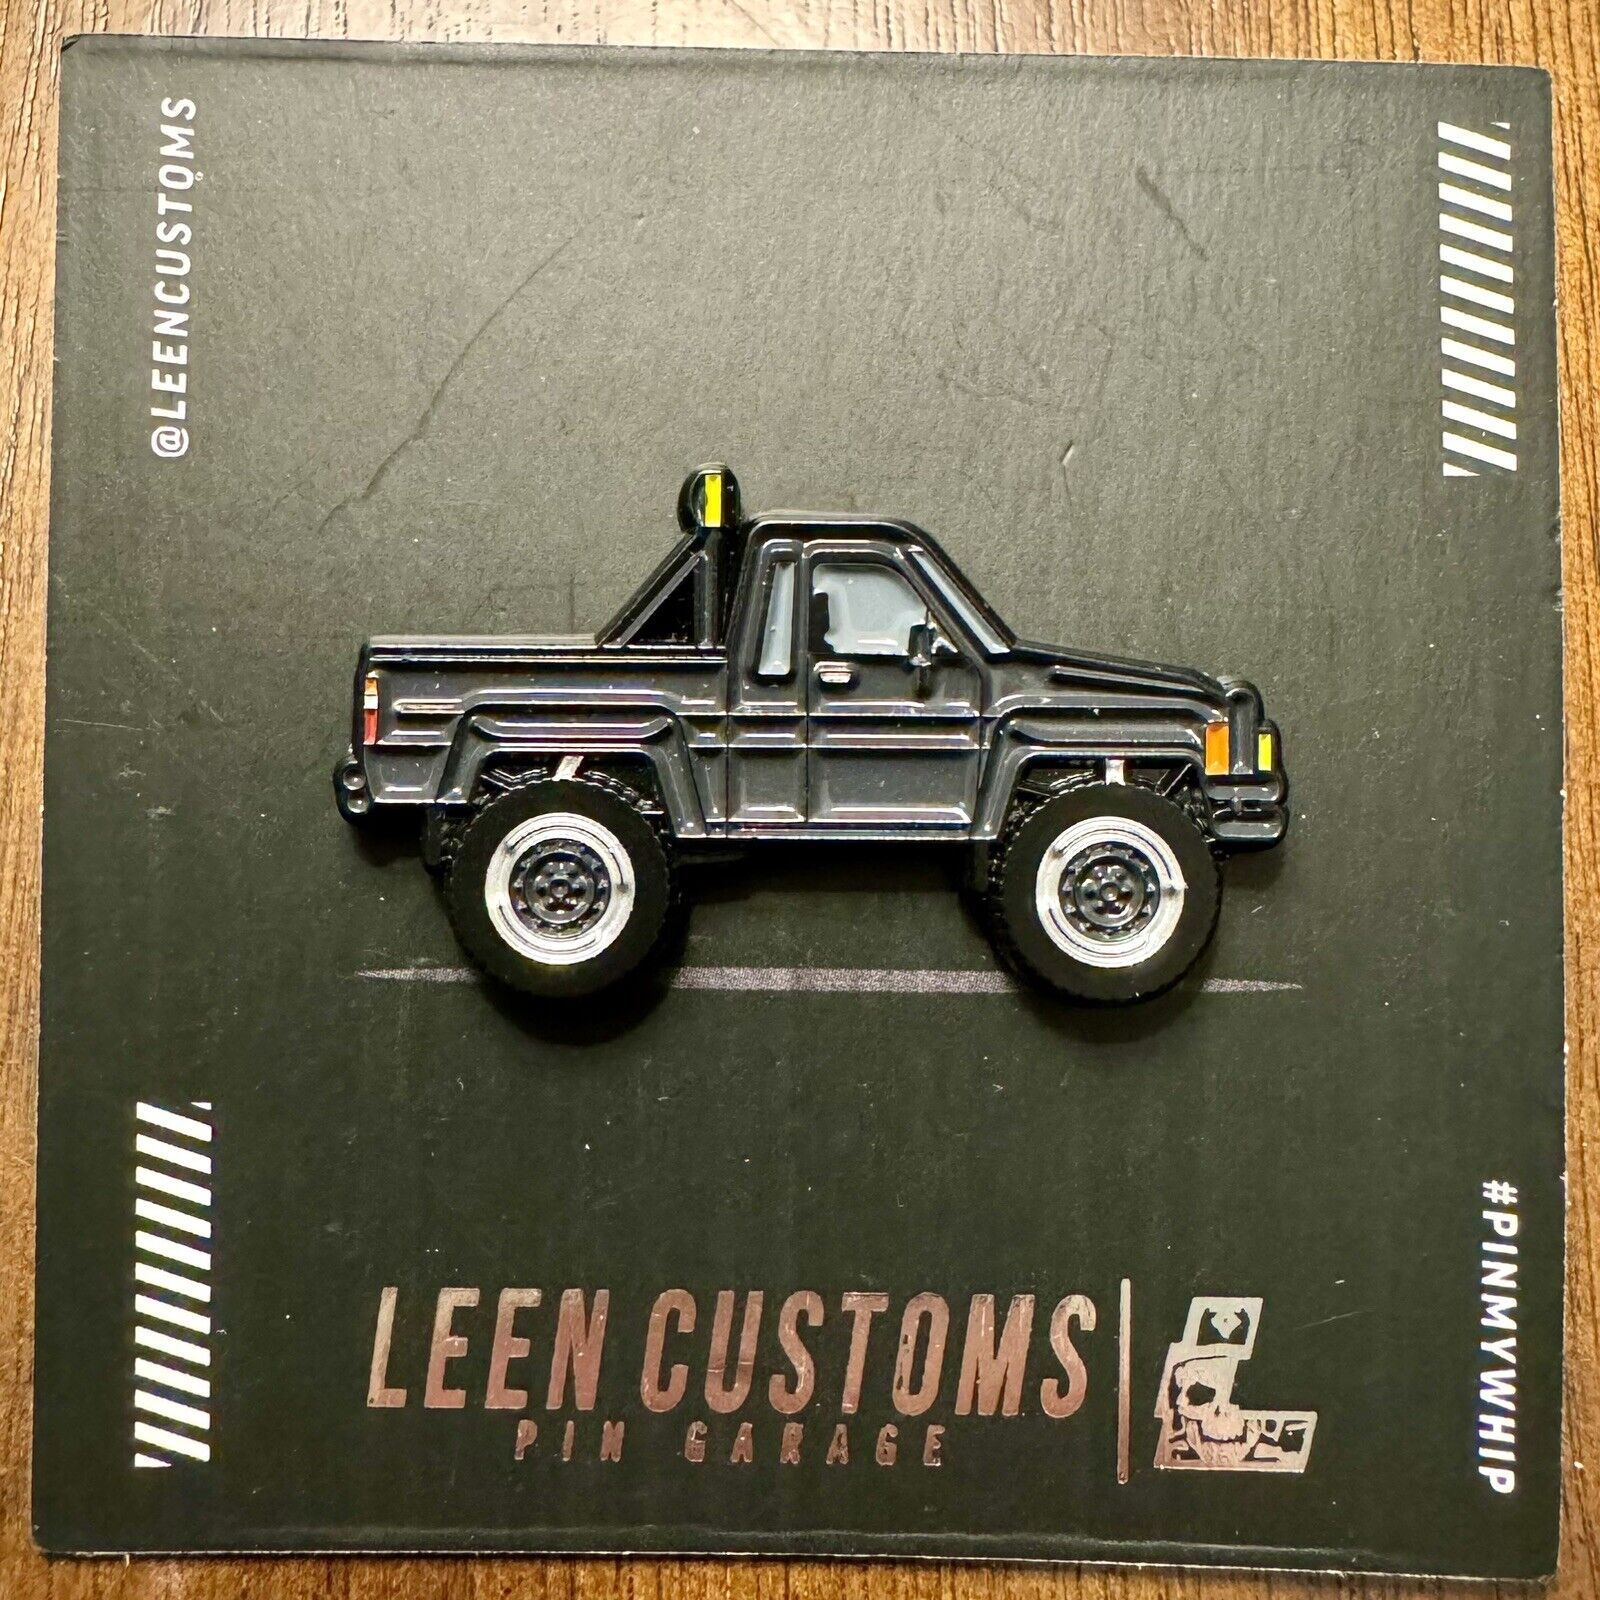 Leen Customs Toyota Truck Limited Edition